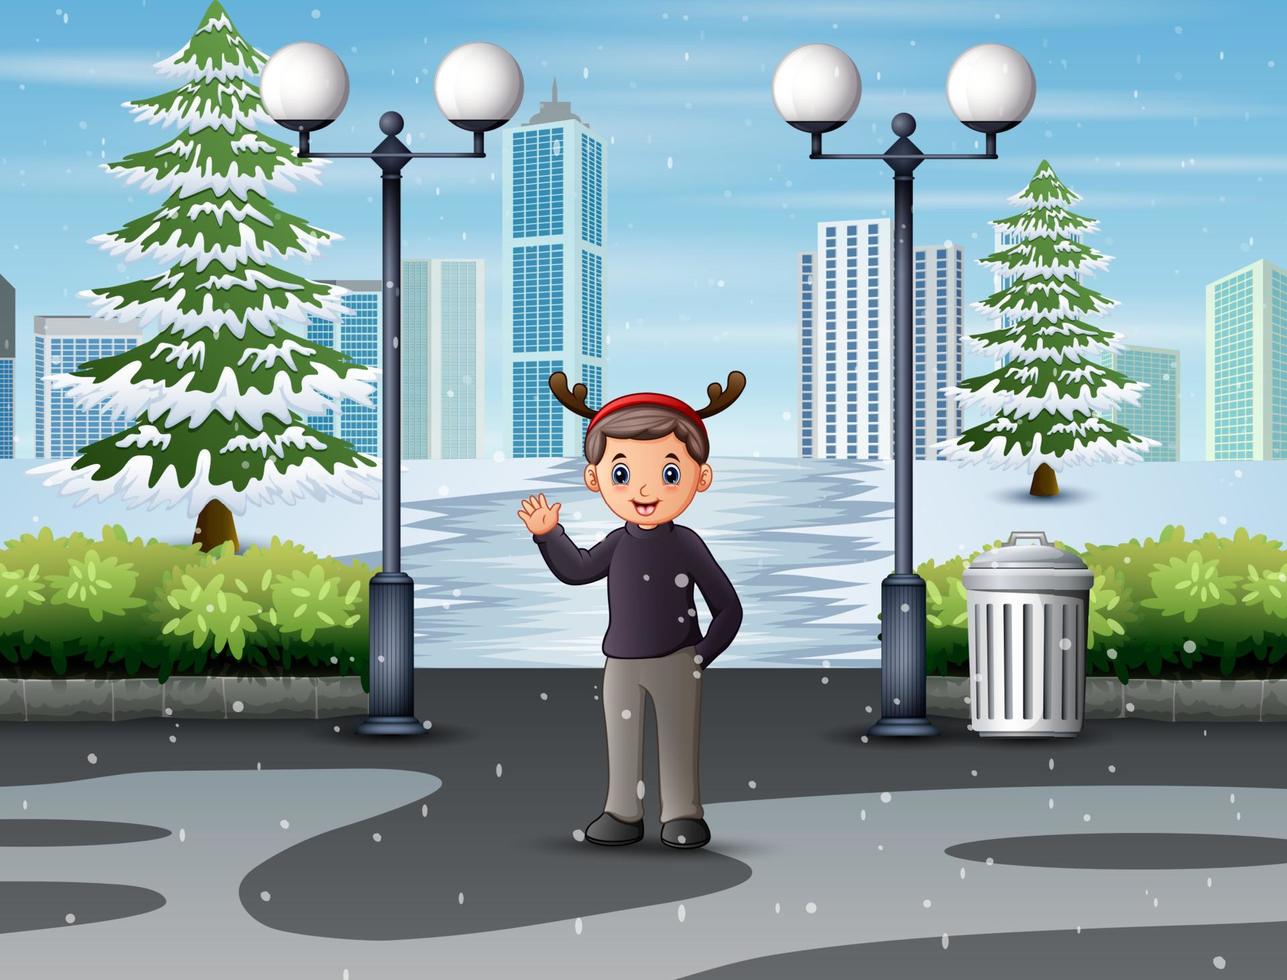 A man smiling and waving at snowy playground vector